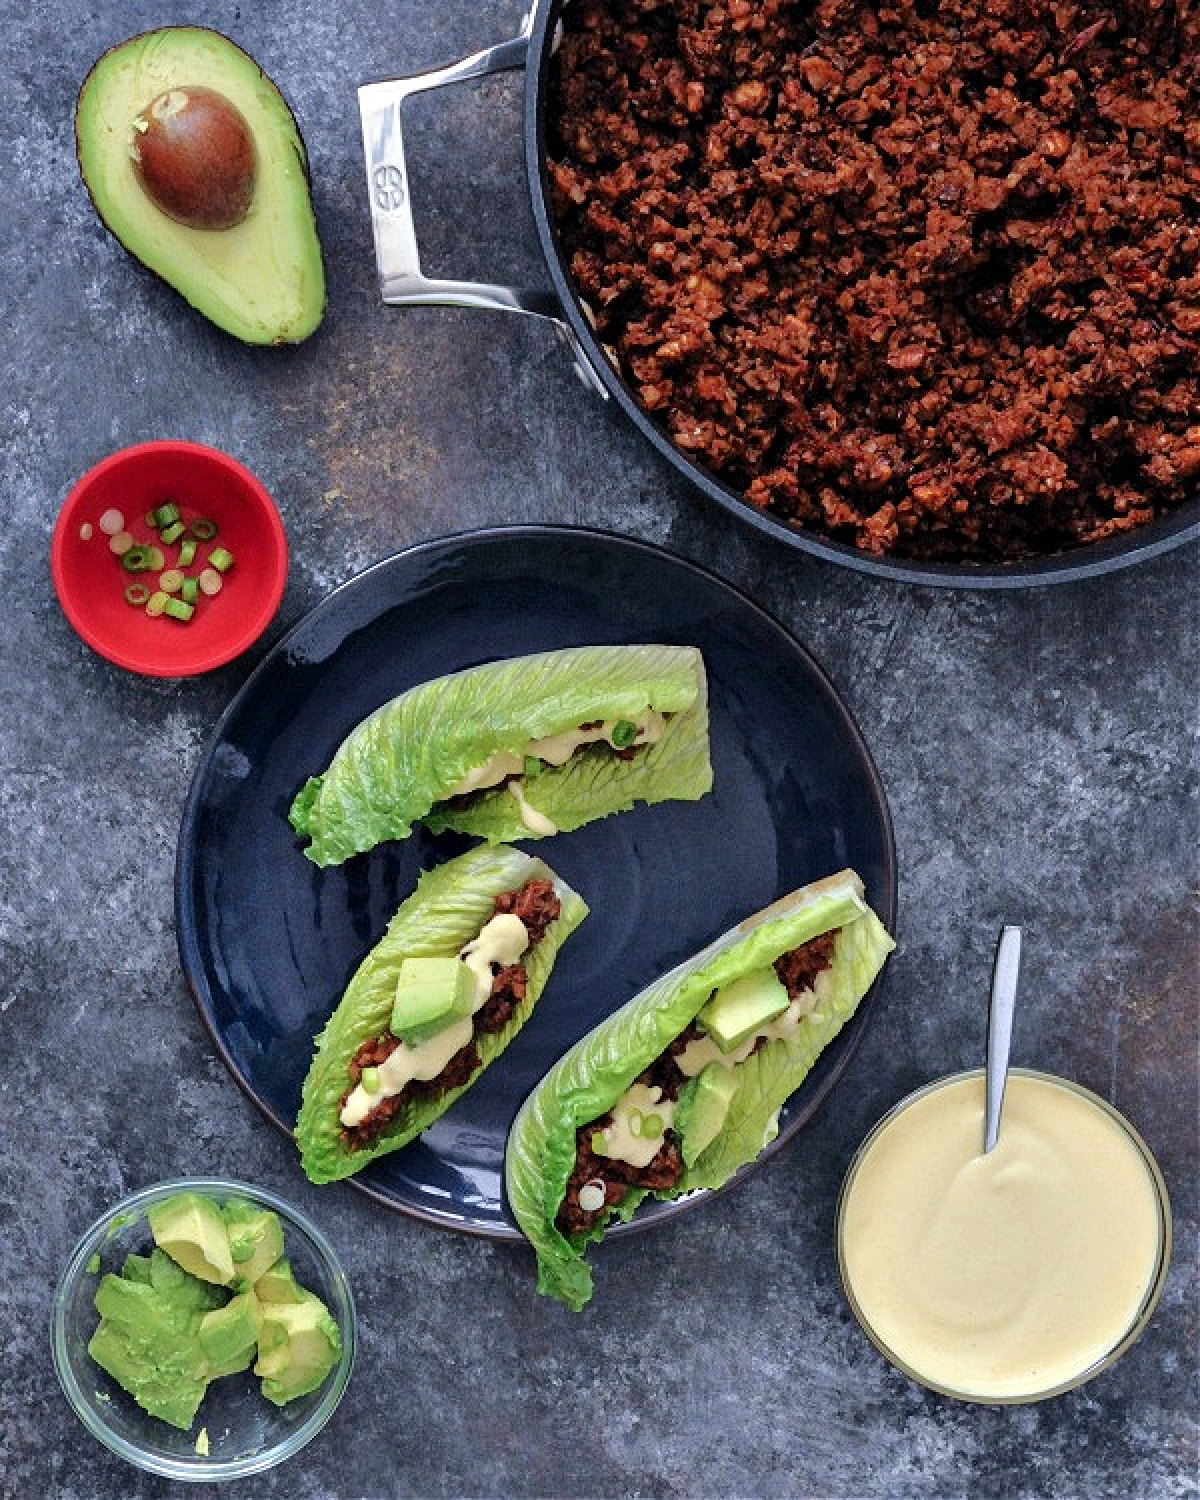 Overhead view of vegan chorizo sausage in a skillet, next to lettuce wraps with the chorizo, avocado slices and dairy free cheese sauce. A small bowl of cheese sauce, a half avocado, and a smaller bowl of sliced avocado on the side.